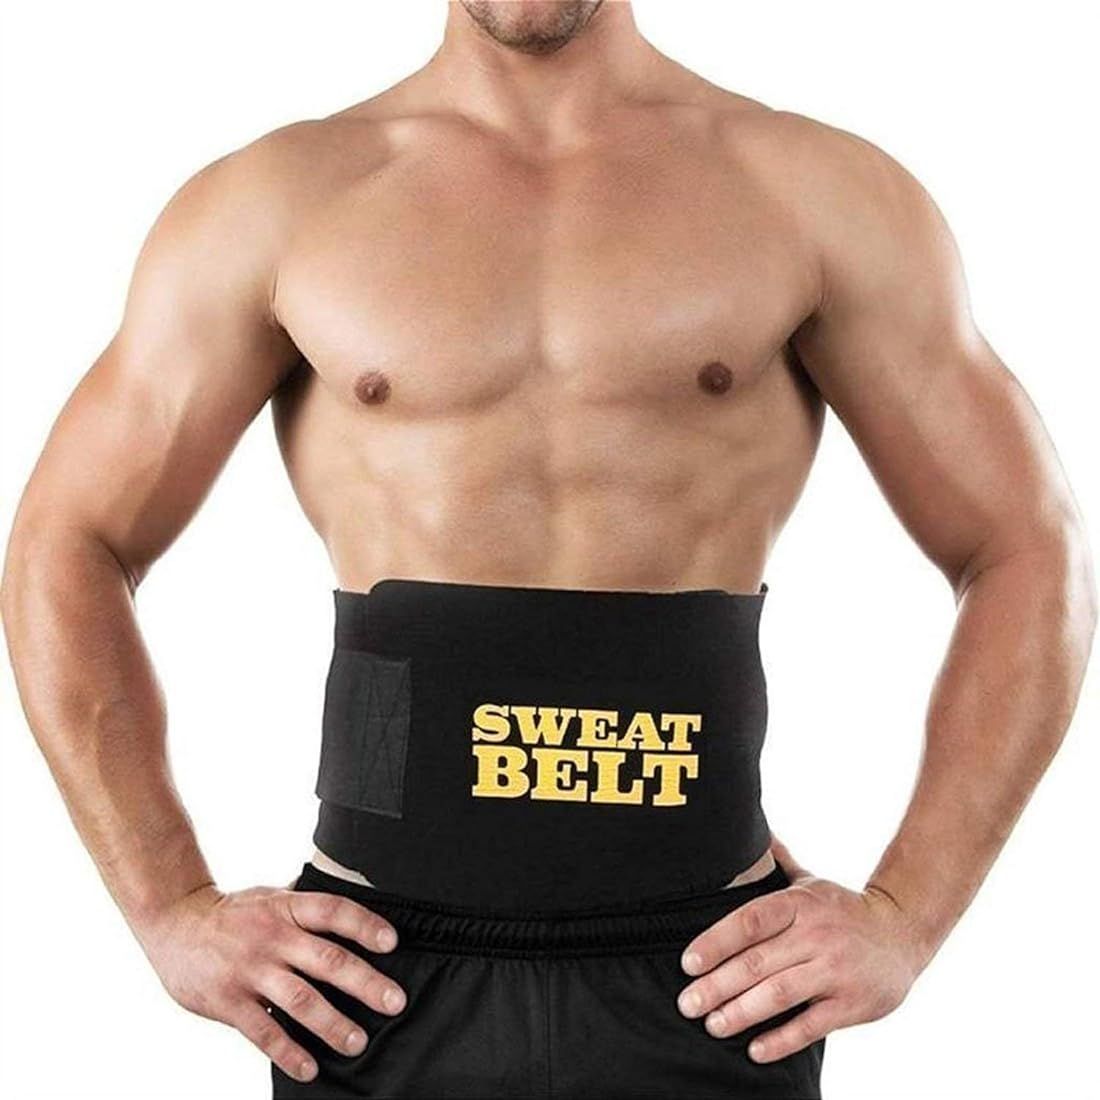 Buy Sweet Sweat Waist Trimmer Belt-large at Lowest Price in